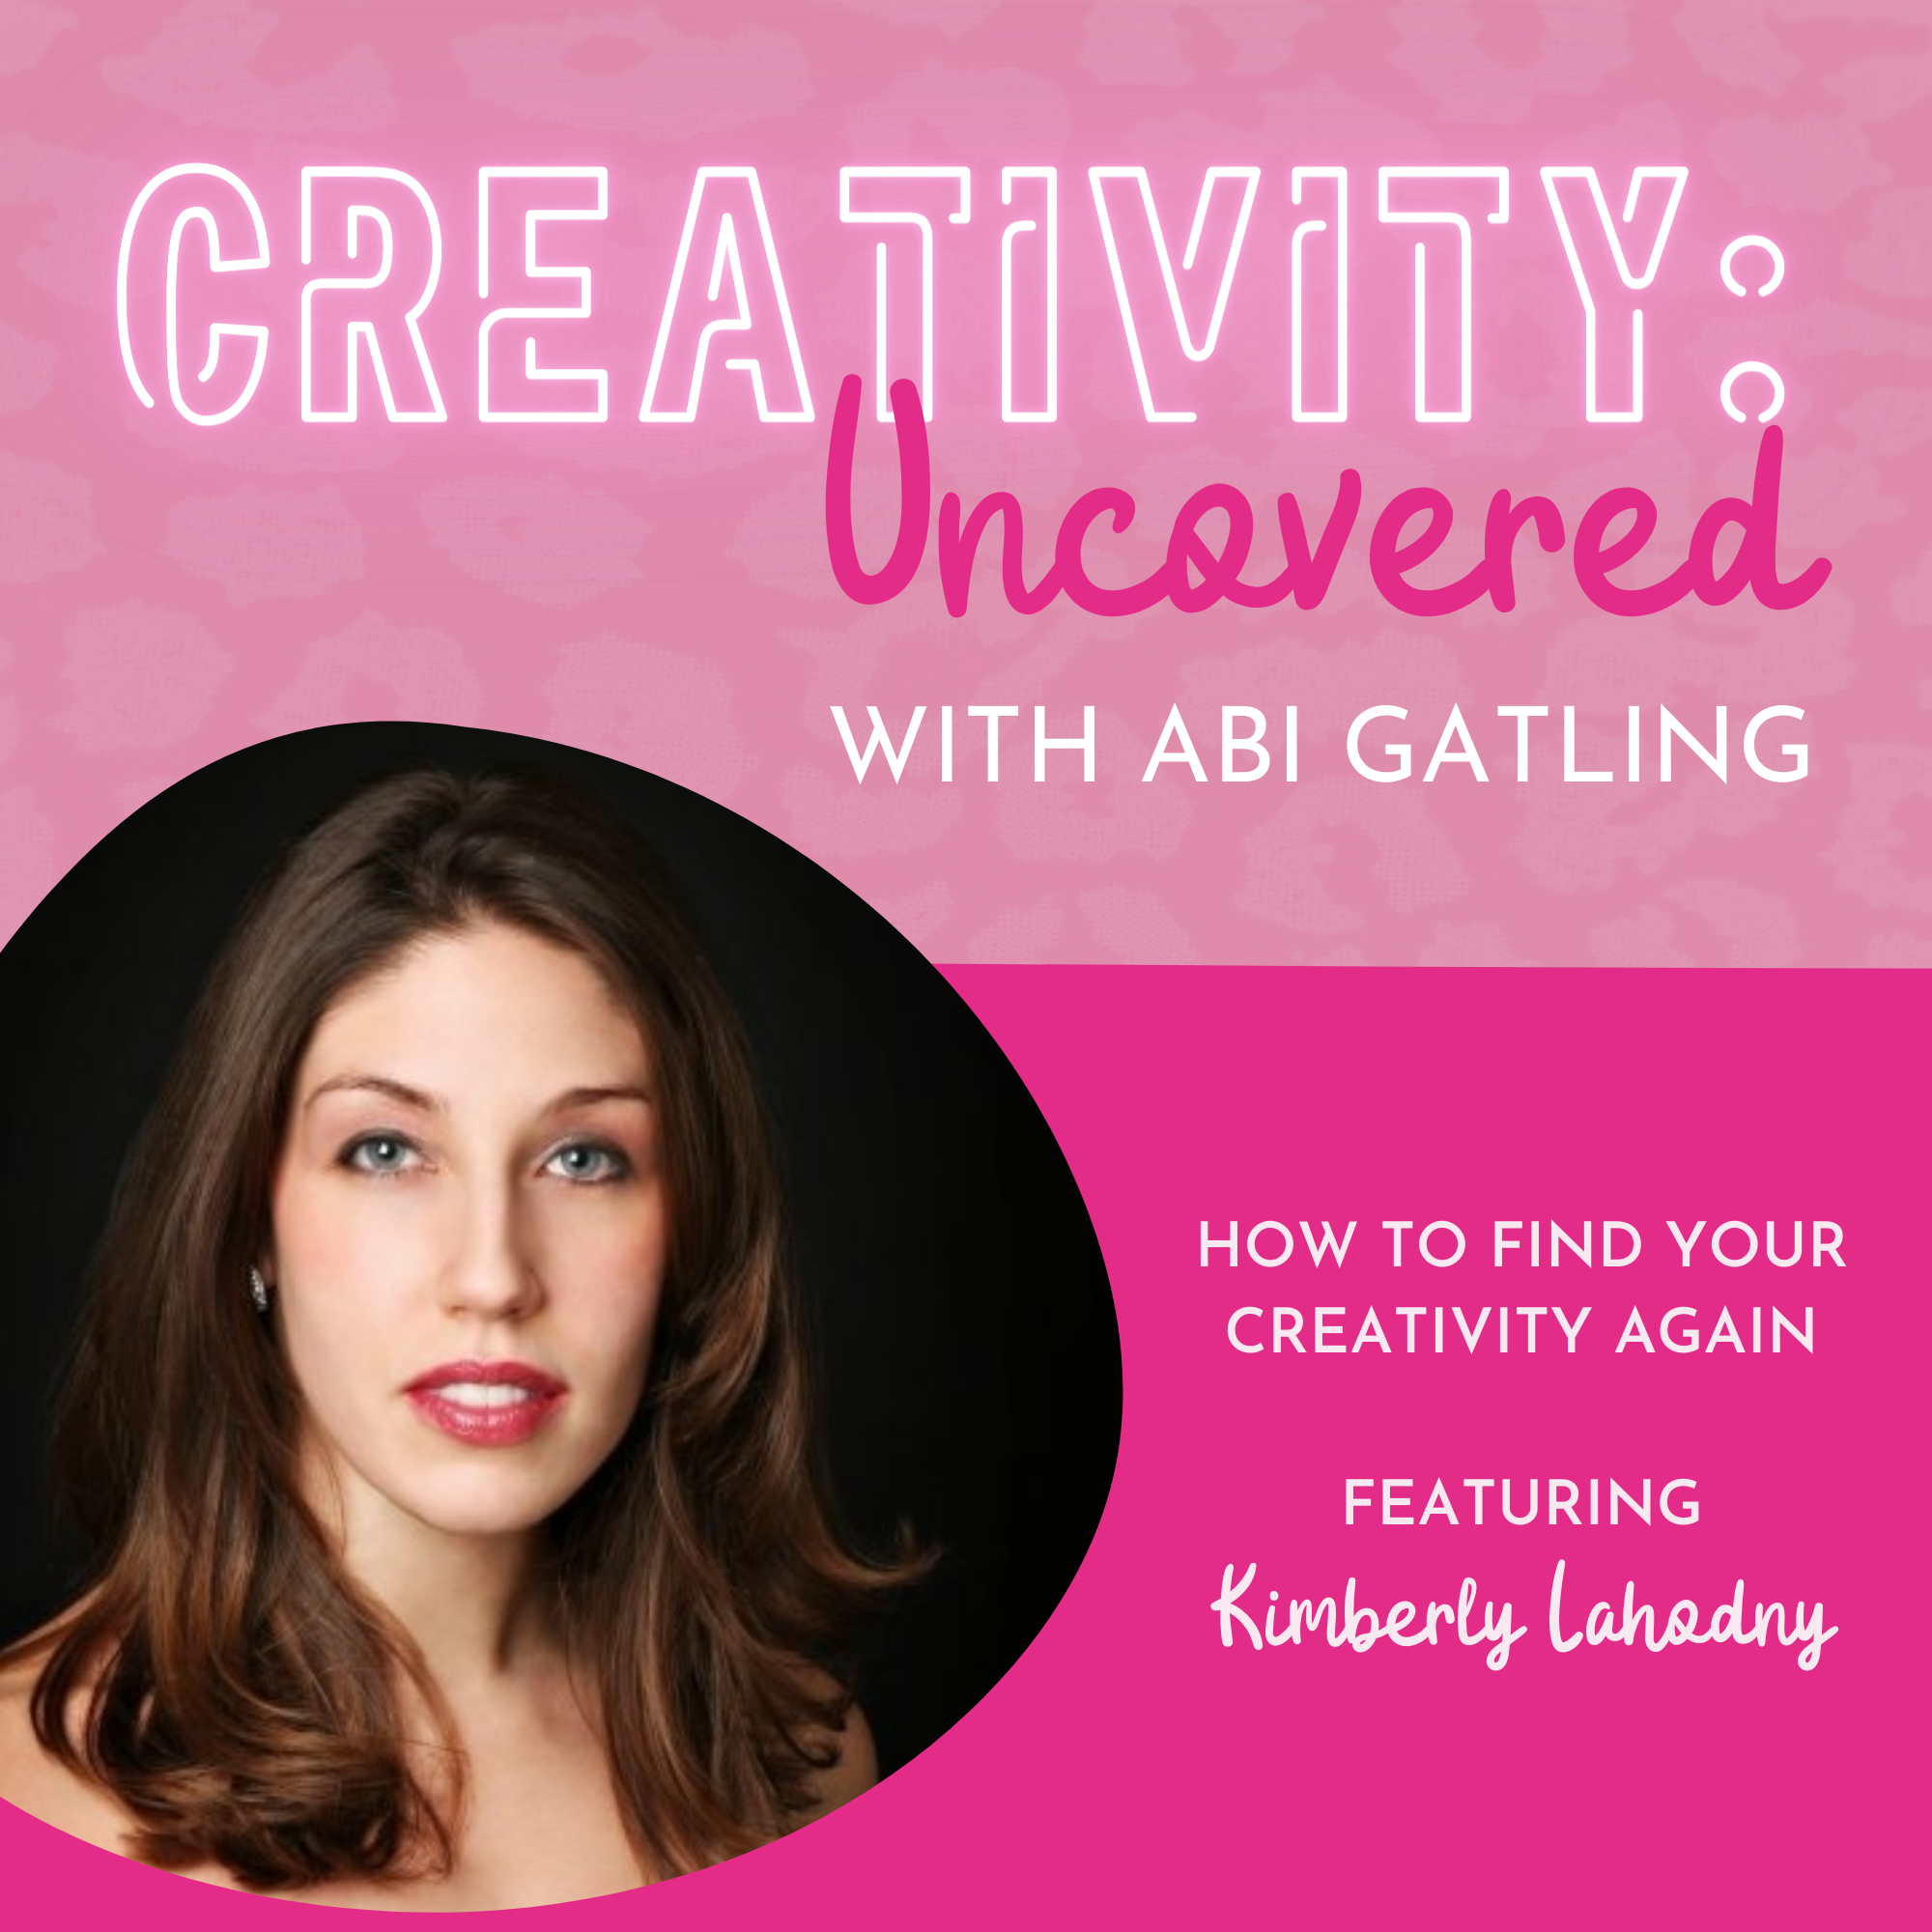 Creativity: Uncovered podcast episode graphic featuring guest Kimberly Lahodny